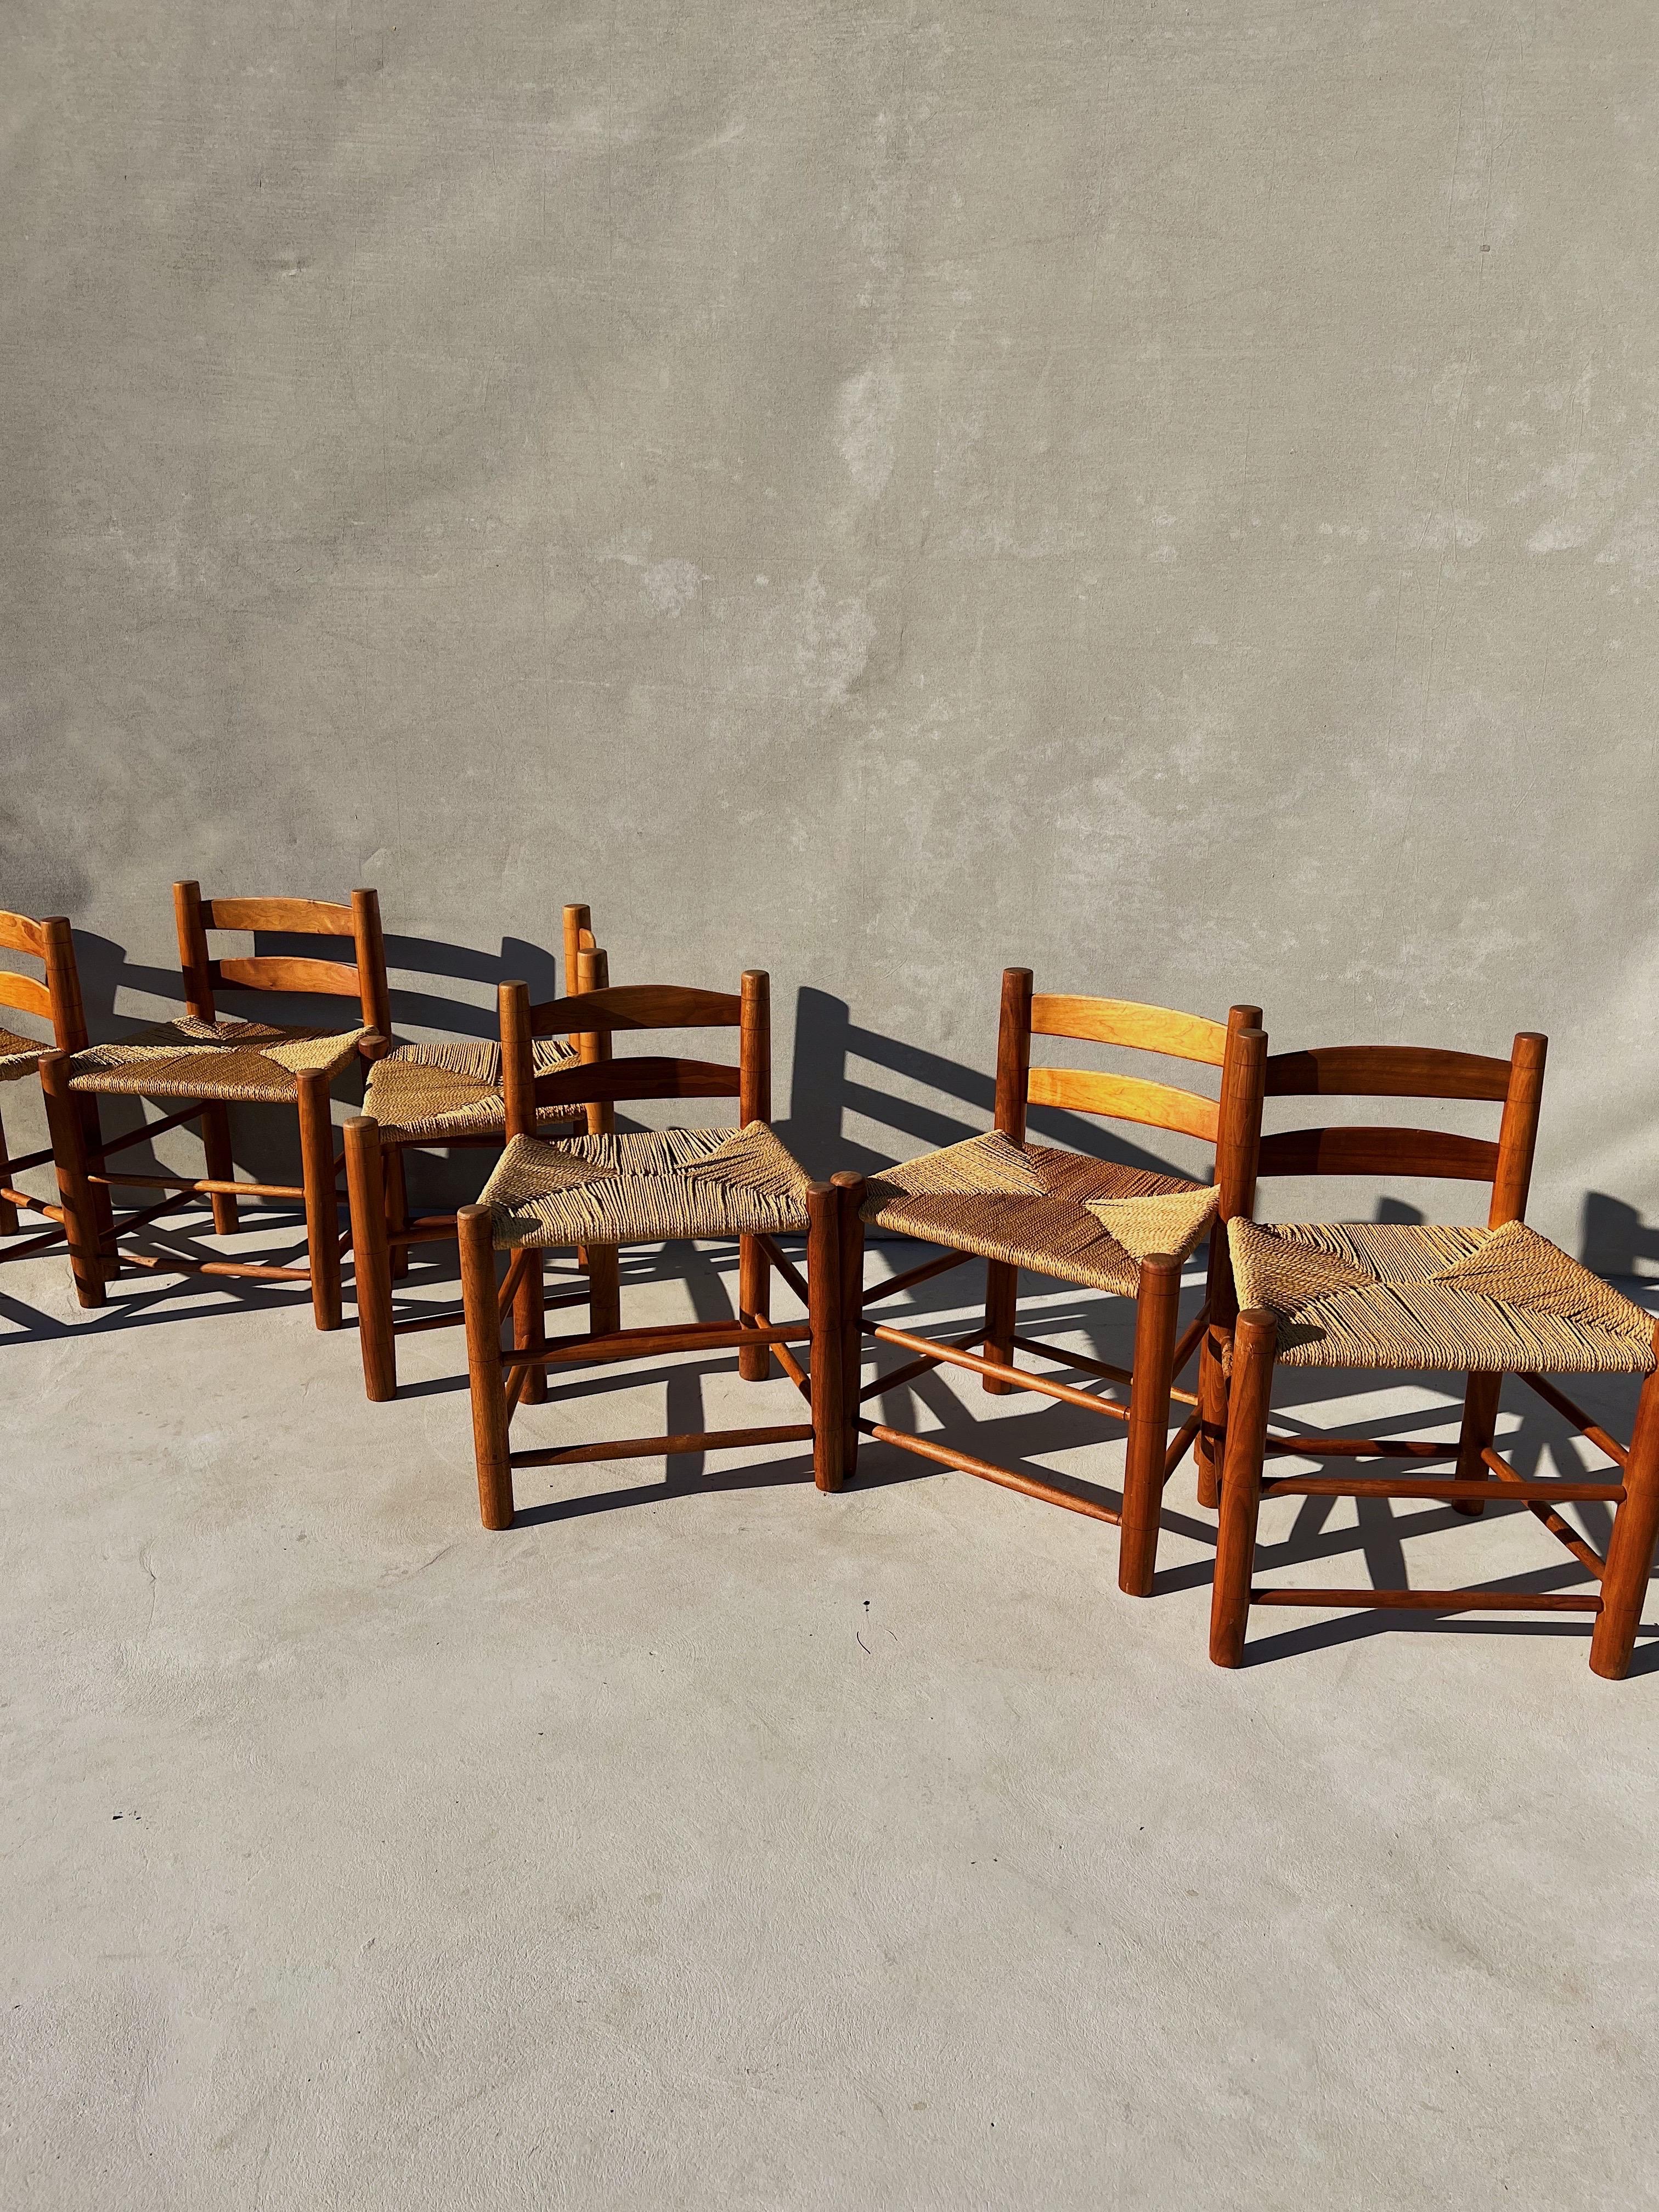 One of a kind dining chairs, custom made sometime in the mid-late 20th century

Each chair is sculpted out of a a warm, electric and dramatically veined walnut wood- tone and color similar to teak wood 

Thoughtful details - rope woven seats,